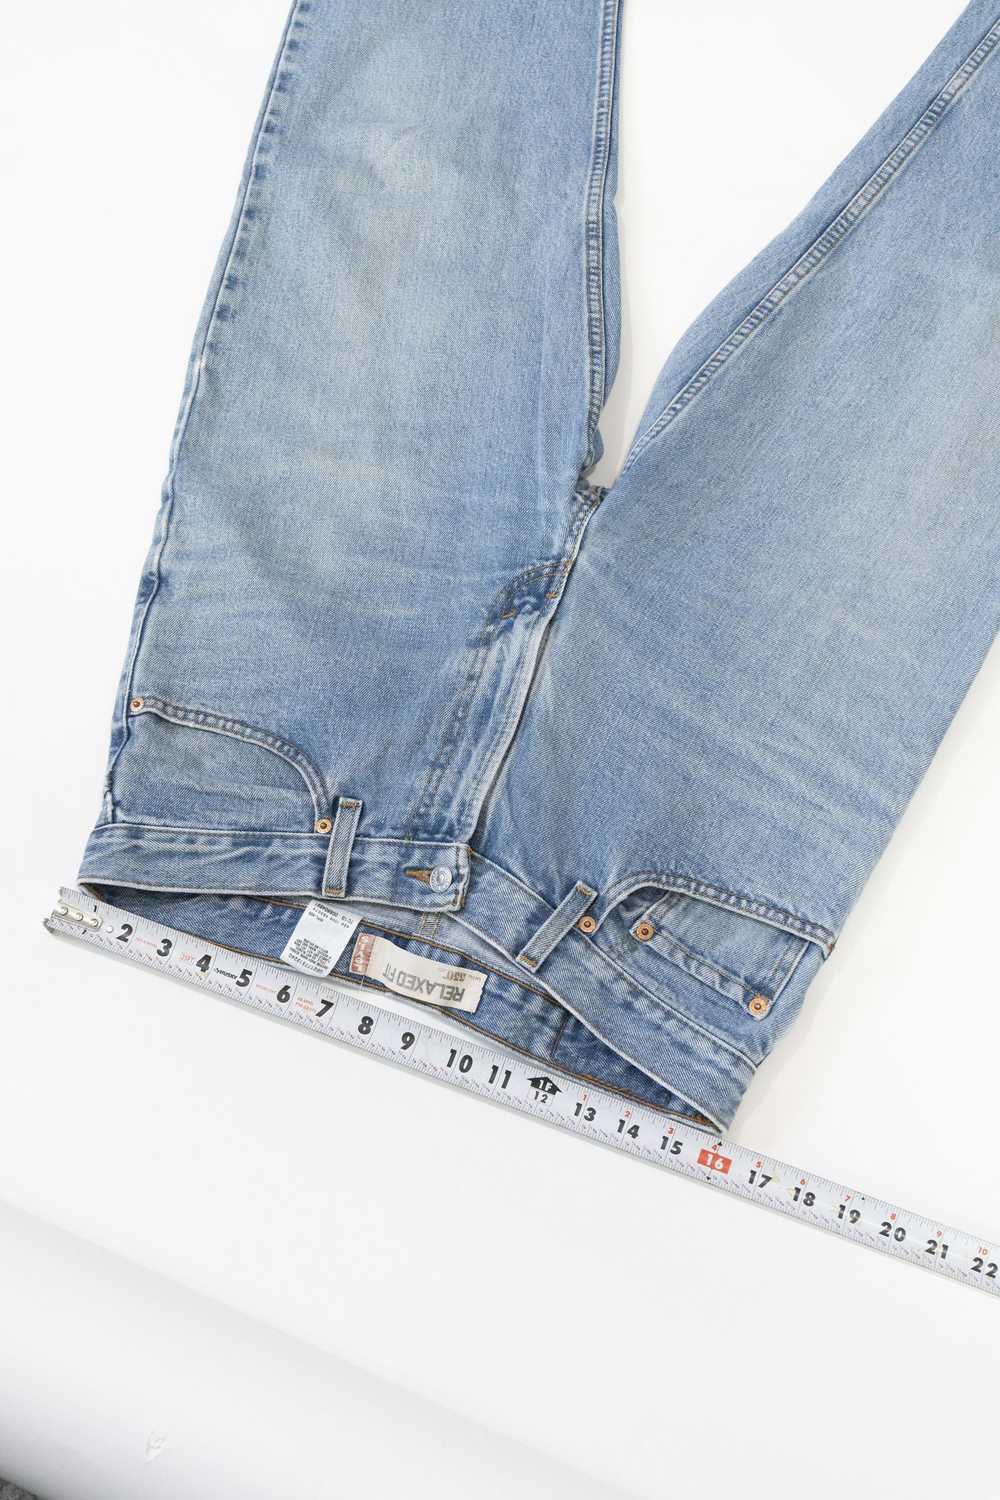 Levi's × Streetwear Levi's 550 Relaxed Fit jeans - image 5